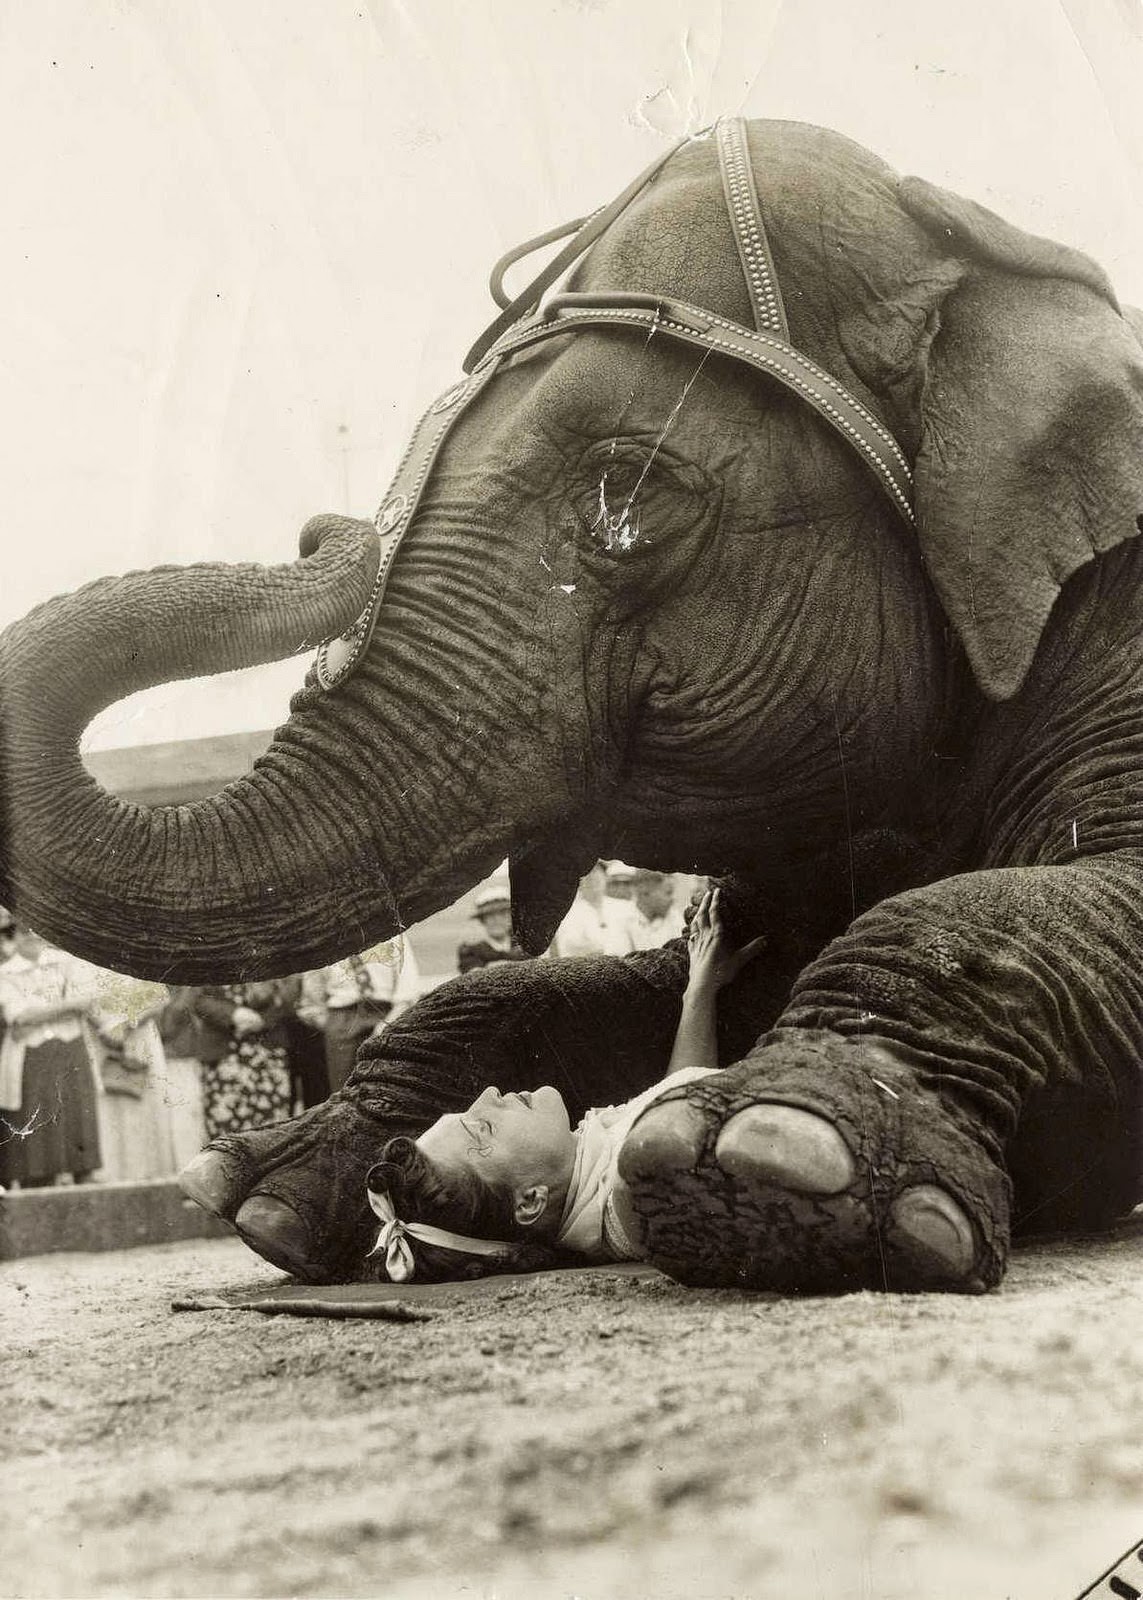 Stunning Historical Photos of Circuses in Netherlands from the Early 20th Century